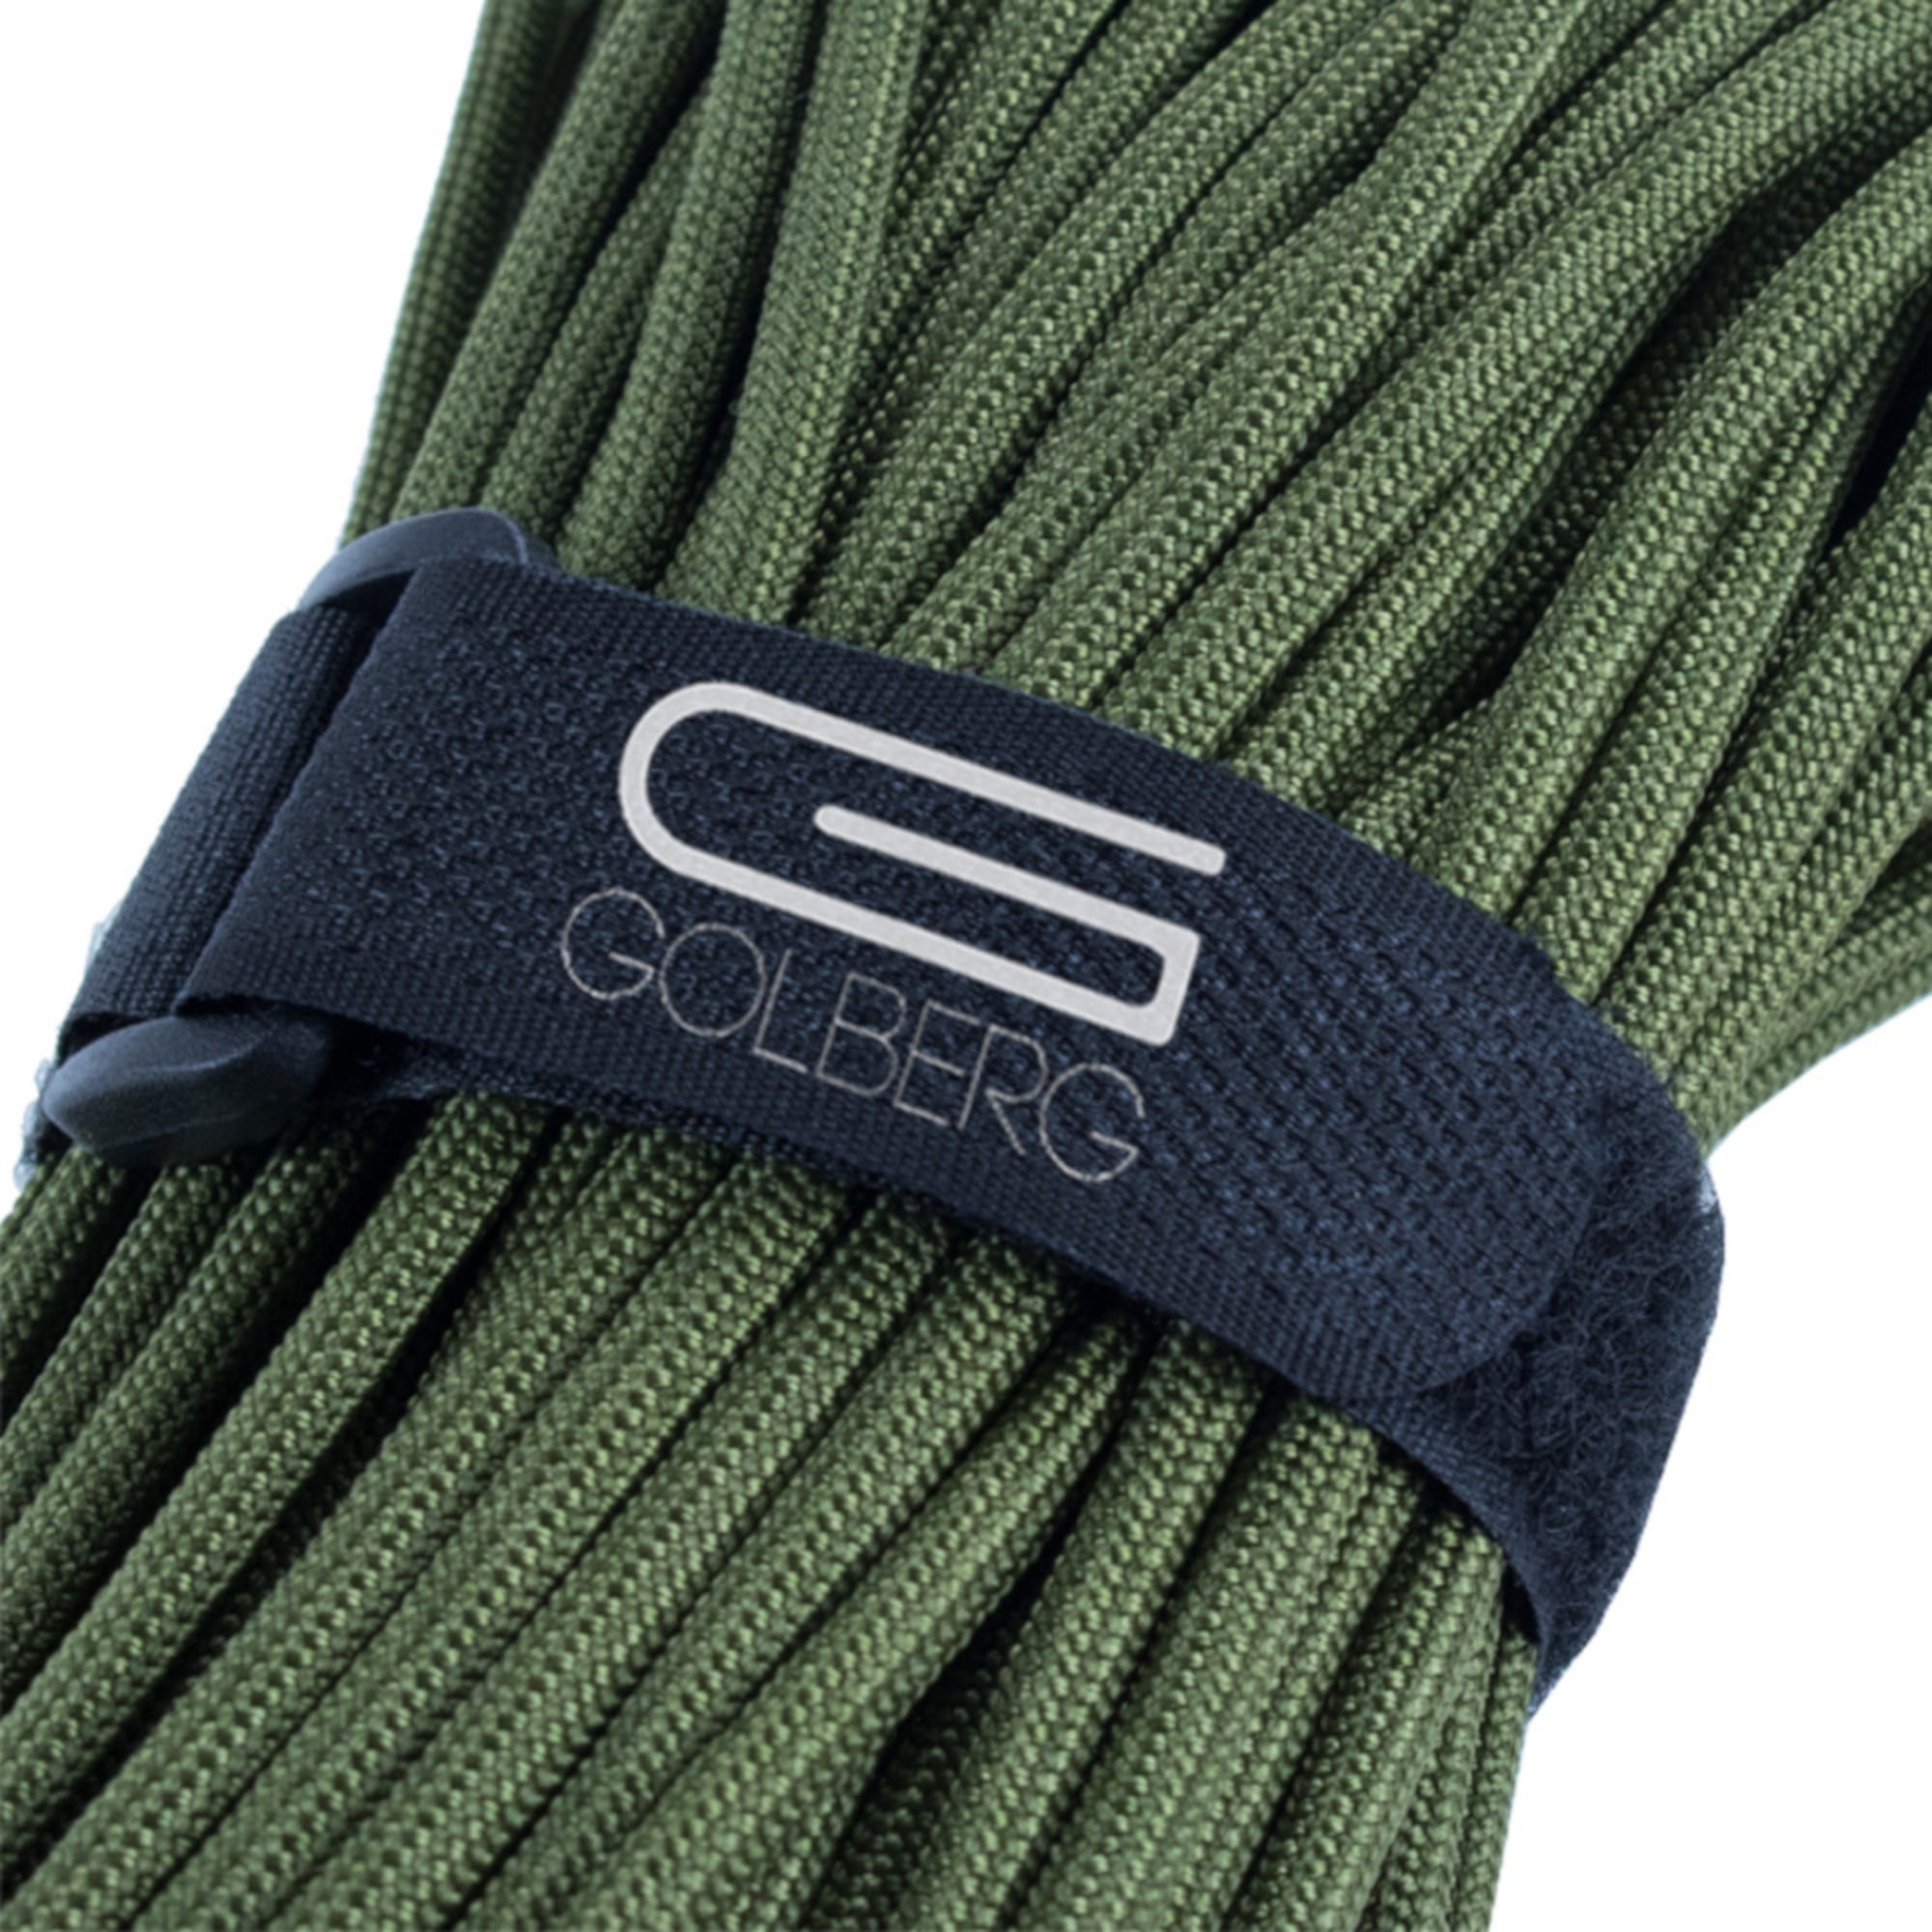 100% Nylon Made in USA GOLBERG G MIL-SPEC-C-5040-H Authentic Mil-Spec 550 Paracord 550 Lb Type III 7 Strand 5/32 Inch Parachute Rope Military Survival Rope 